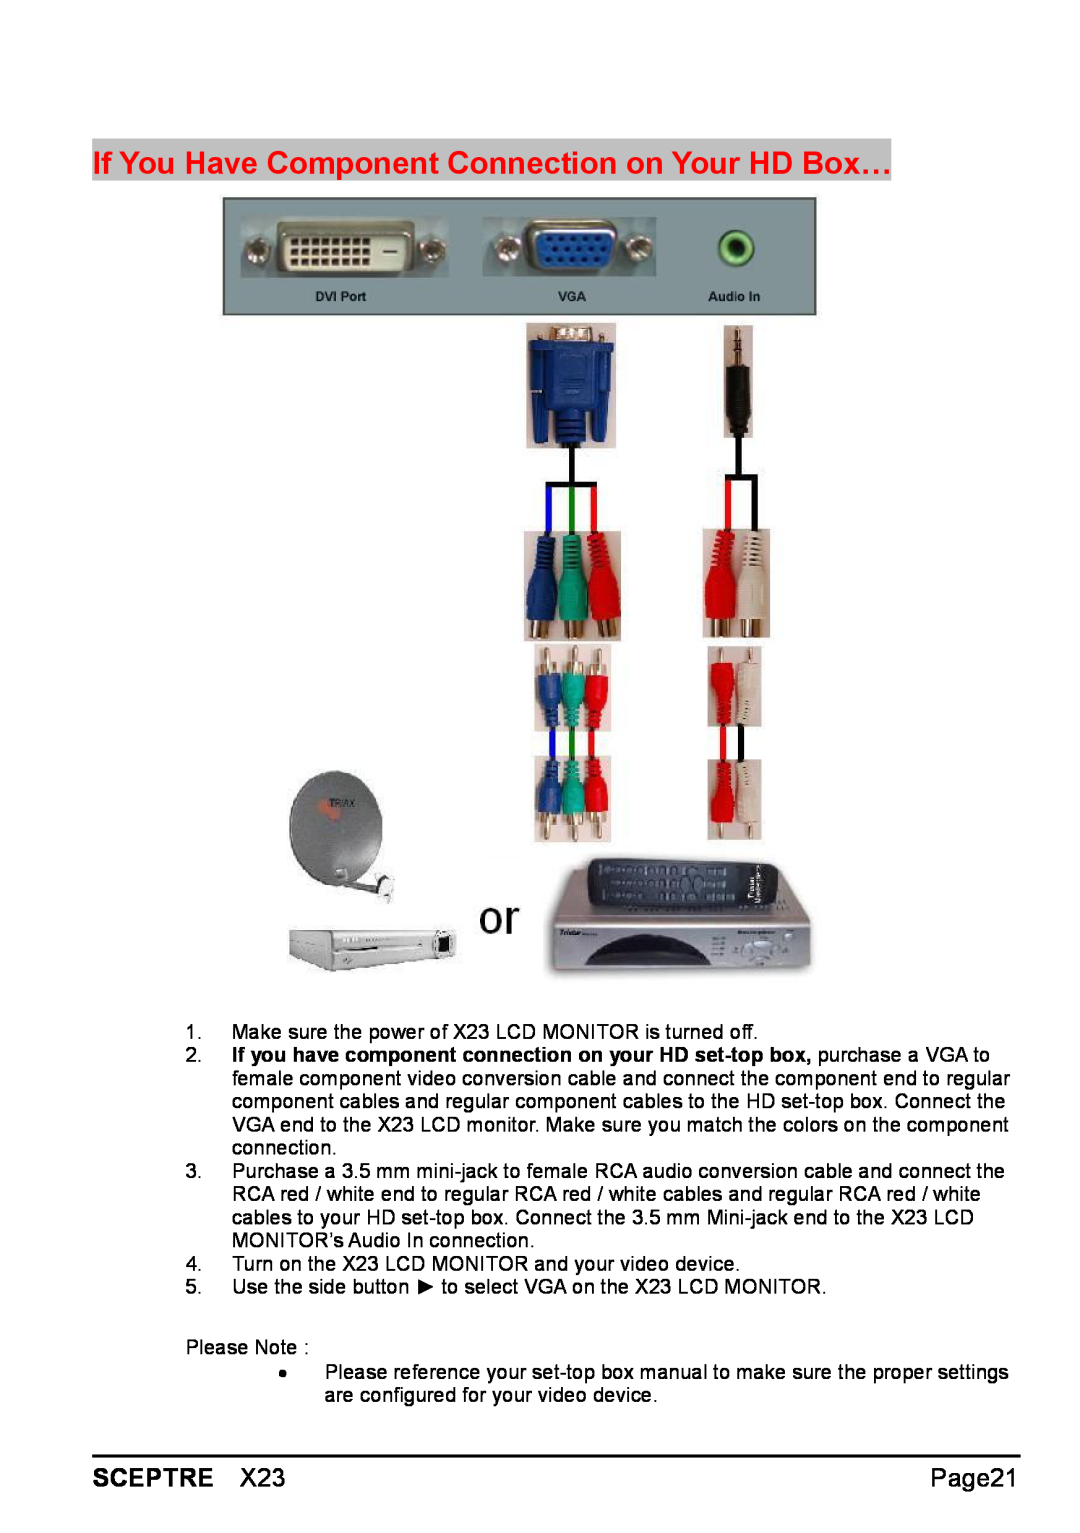 Sceptre Technologies X23 warranty If You Have Component Connection on Your HD Box…, Sceptre, Page21 